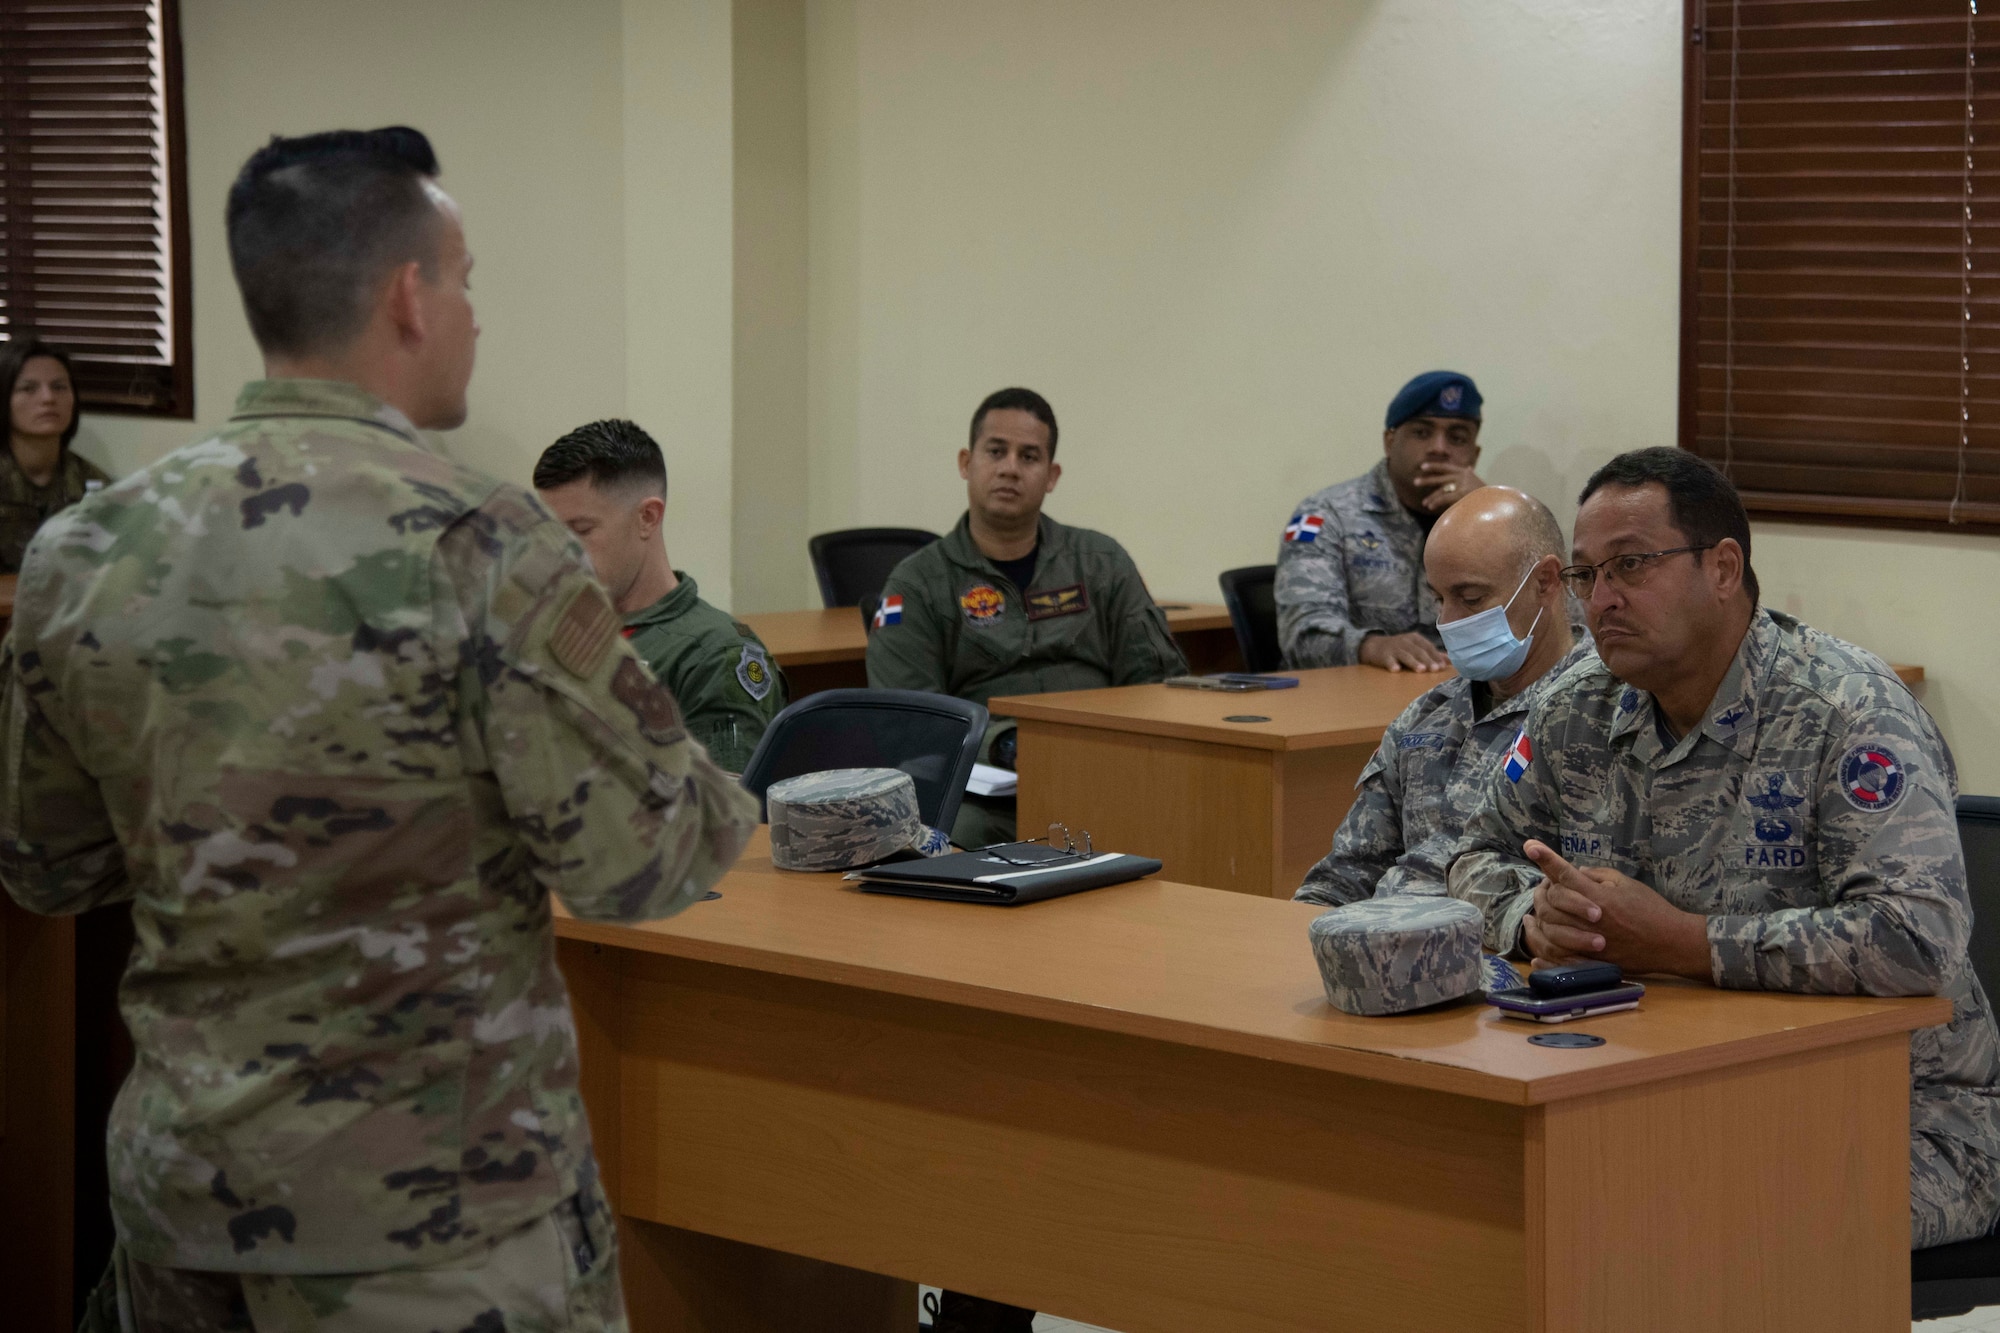 Fuerza Aérea de República Dominicana and U.S. Air Force Airmen discuss exercise Forward Tiger at San Isidro Air Base, Dominican Republic, Feb. 16, 2023. Exercise Forward Tiger was designed to build on longstanding partnerships throughout the Caribbean and contribute to enhanced military readiness, humanitarian relief, and disaster response capabilities. (U.S. Air Force photo by 1st Lt. Christian Little)